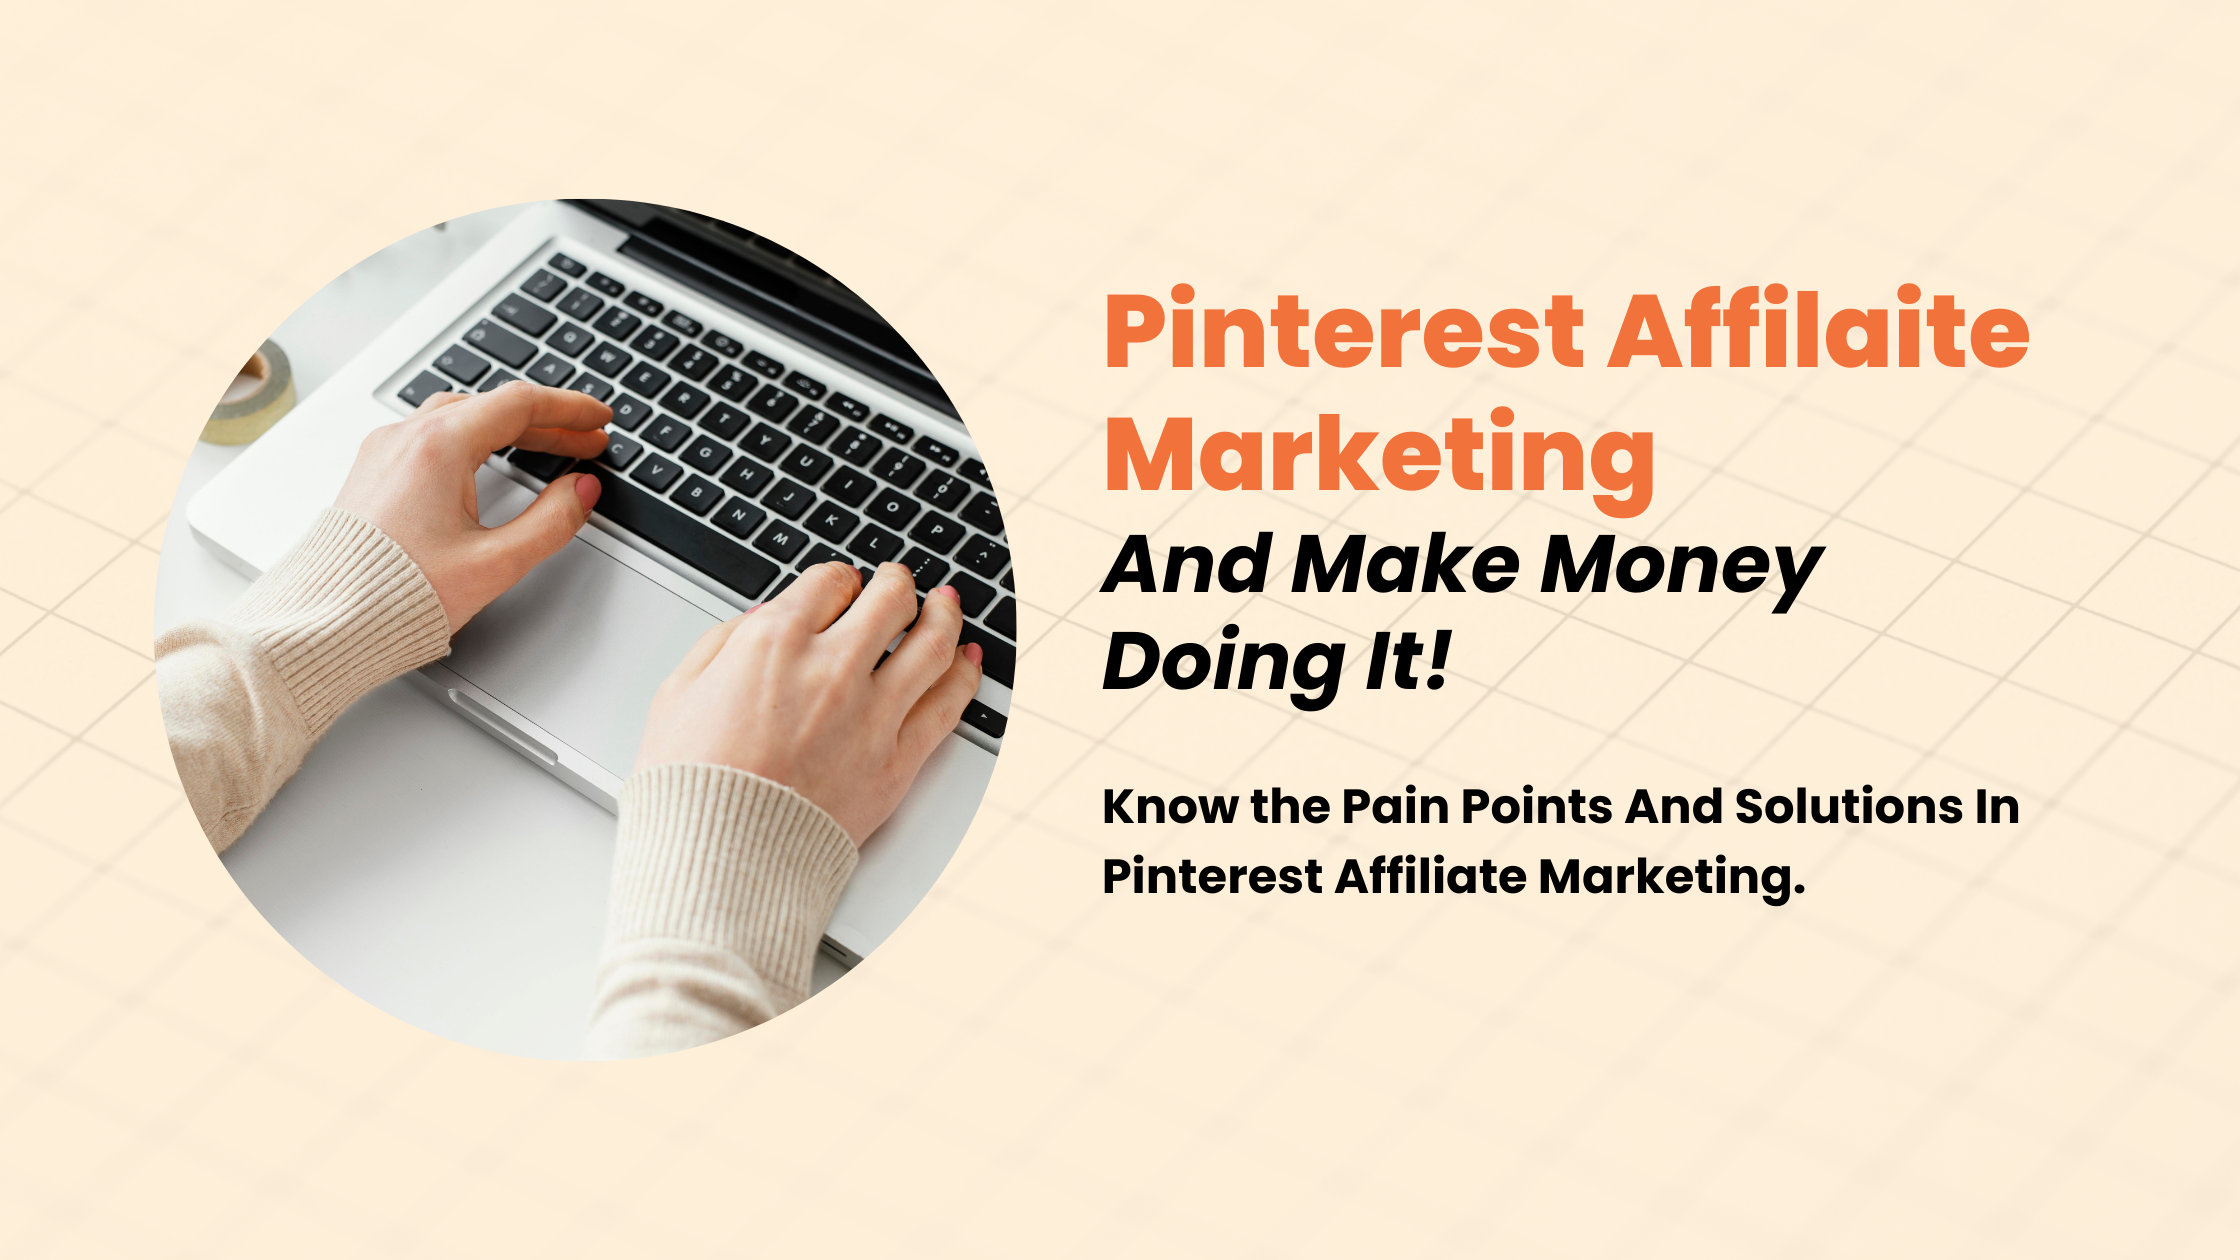 Read more about the article Eye Candy or Empty Clicks? How To Capture Attention and Conversions on Pinterest Affiliate Marketing